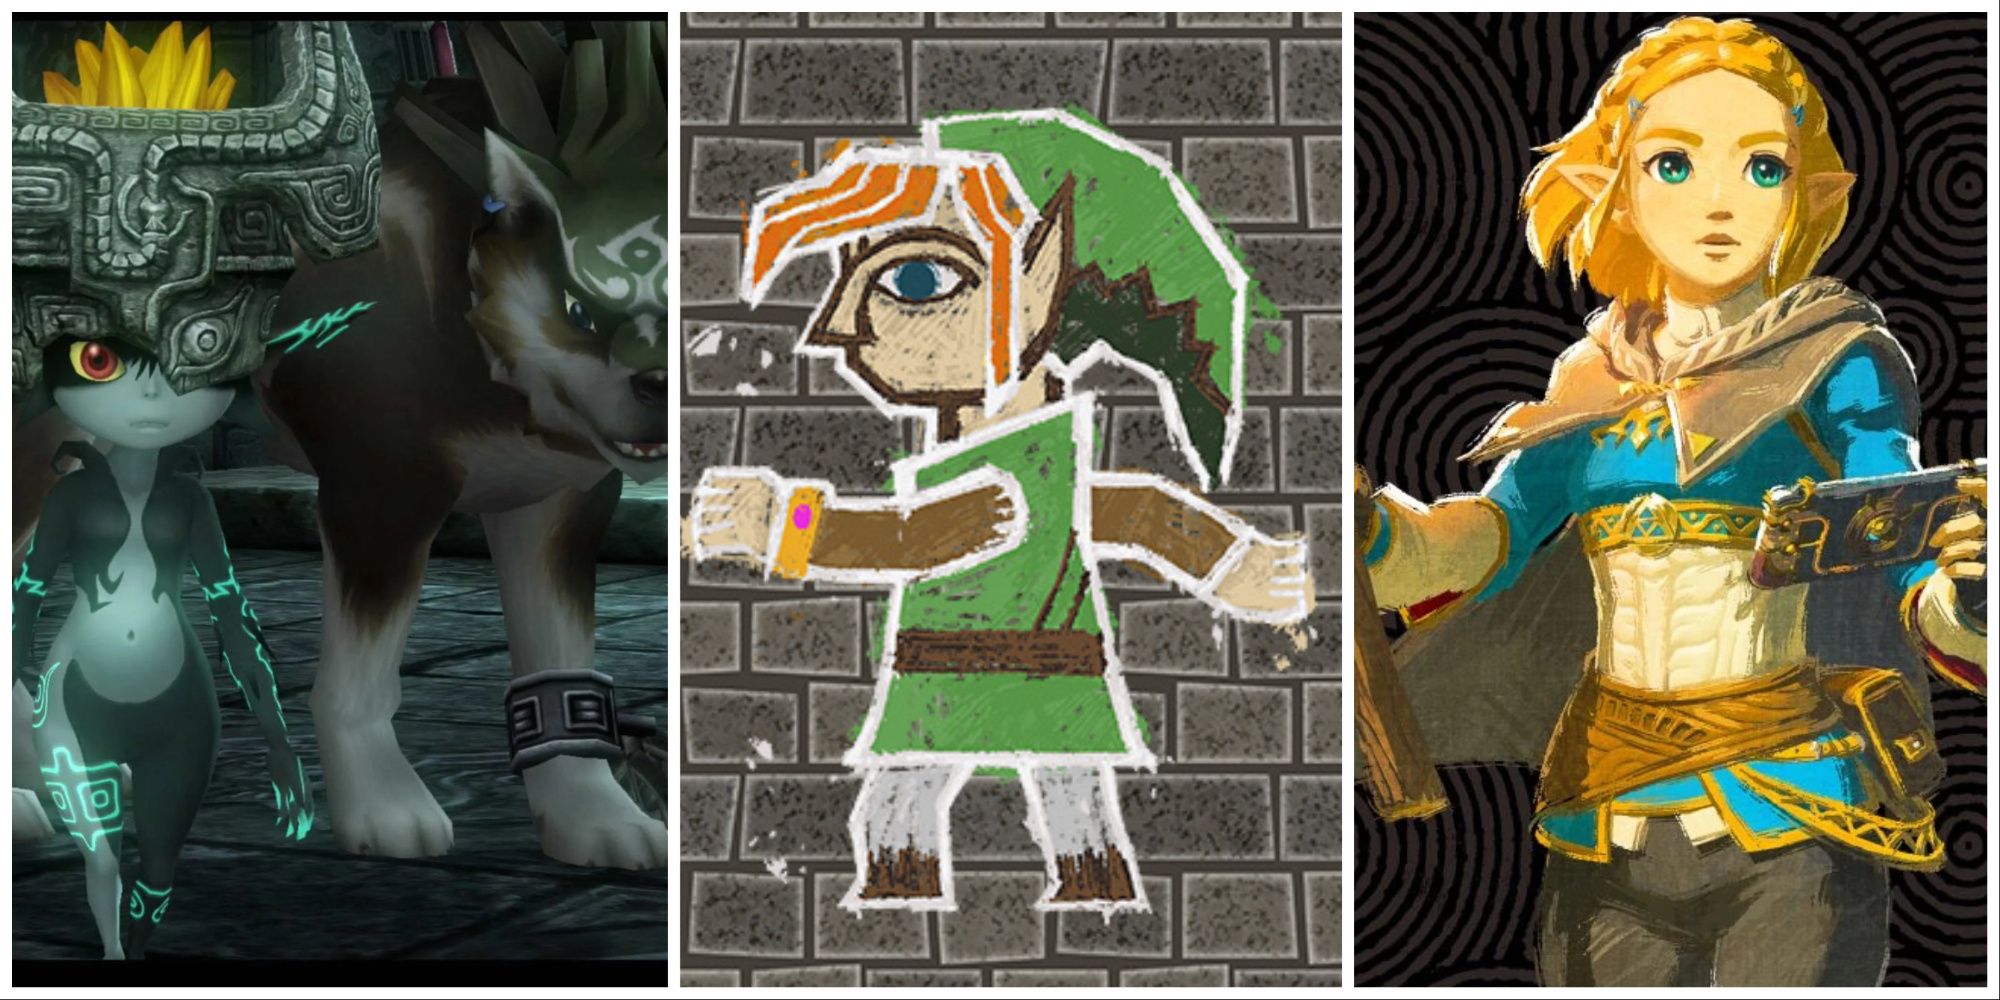 Wind Waker's Controversial Graphics Make It a Truly Timeless Zelda Game